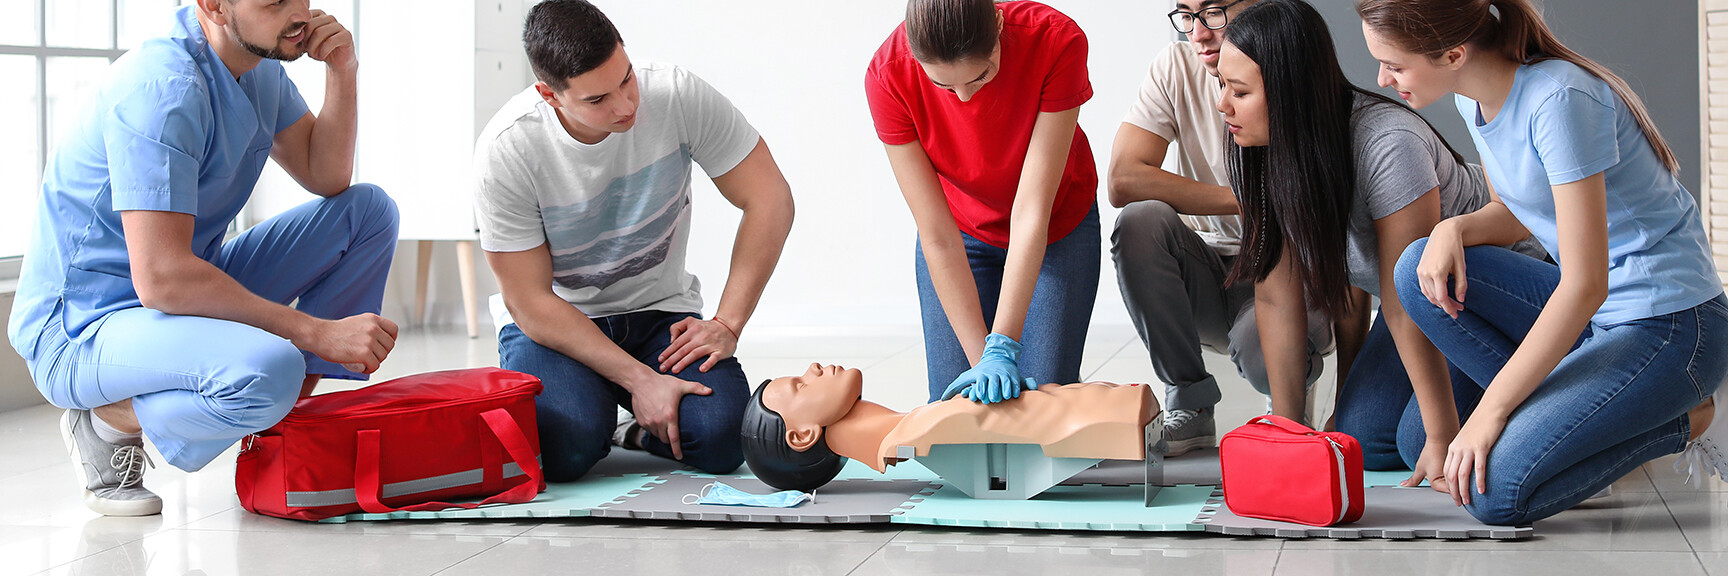 A group of people participating in CPR training, with one person performing chest compressions on a mannequin while others observe and learn.